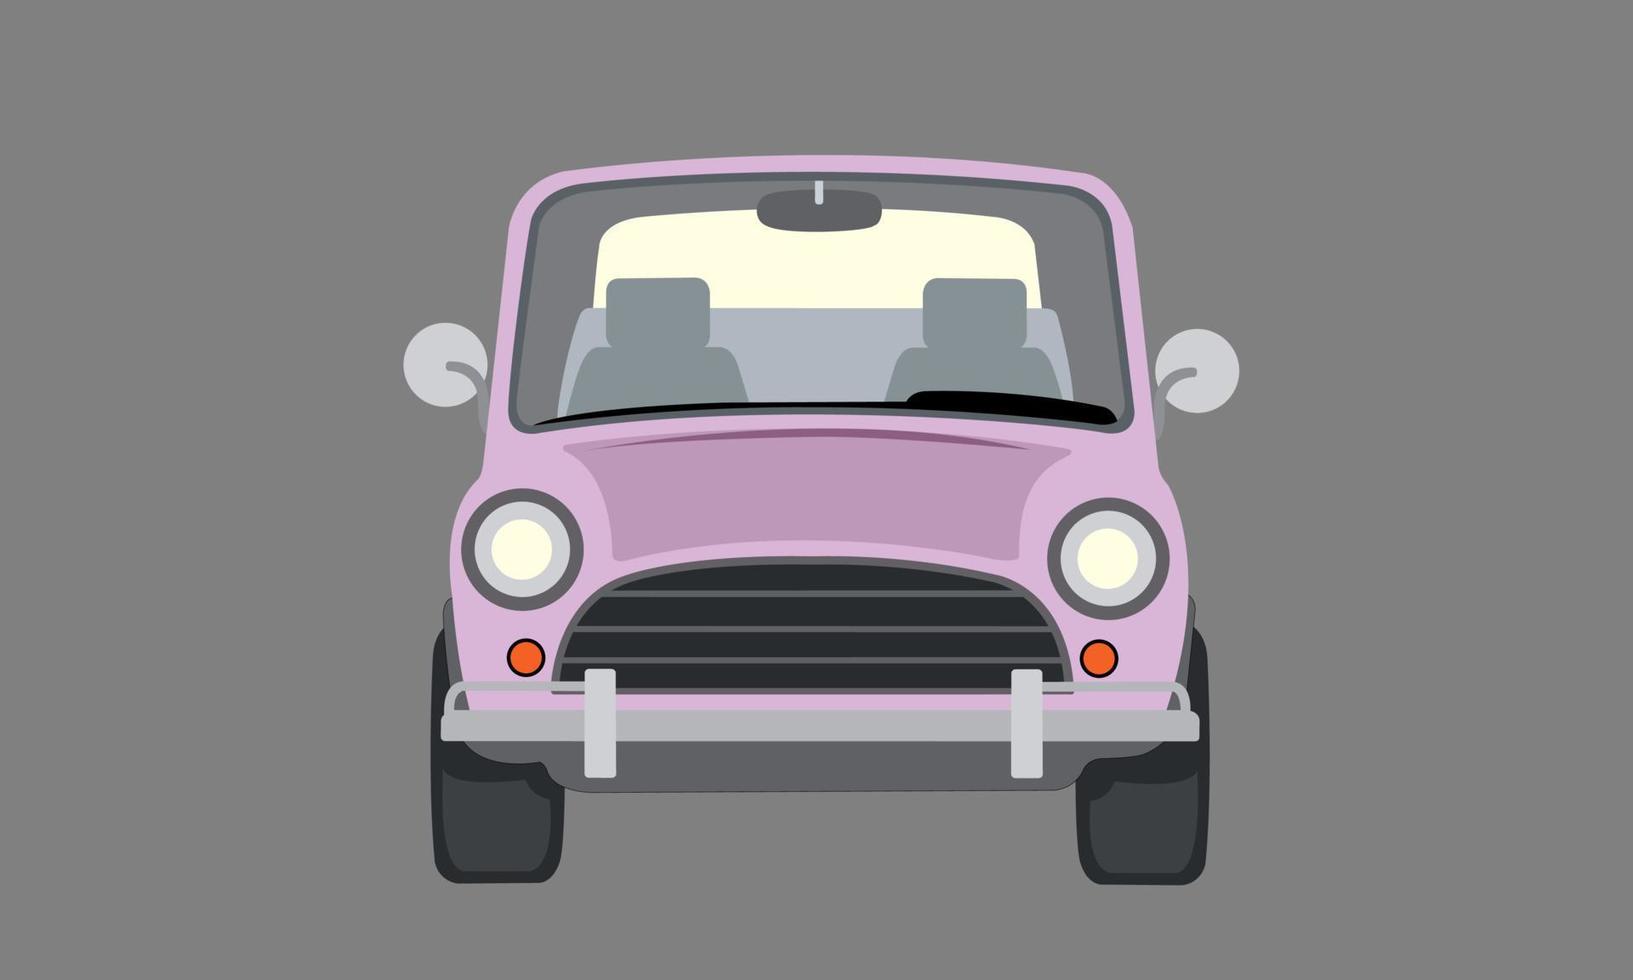 Vector illustration retro pink car in the front view.